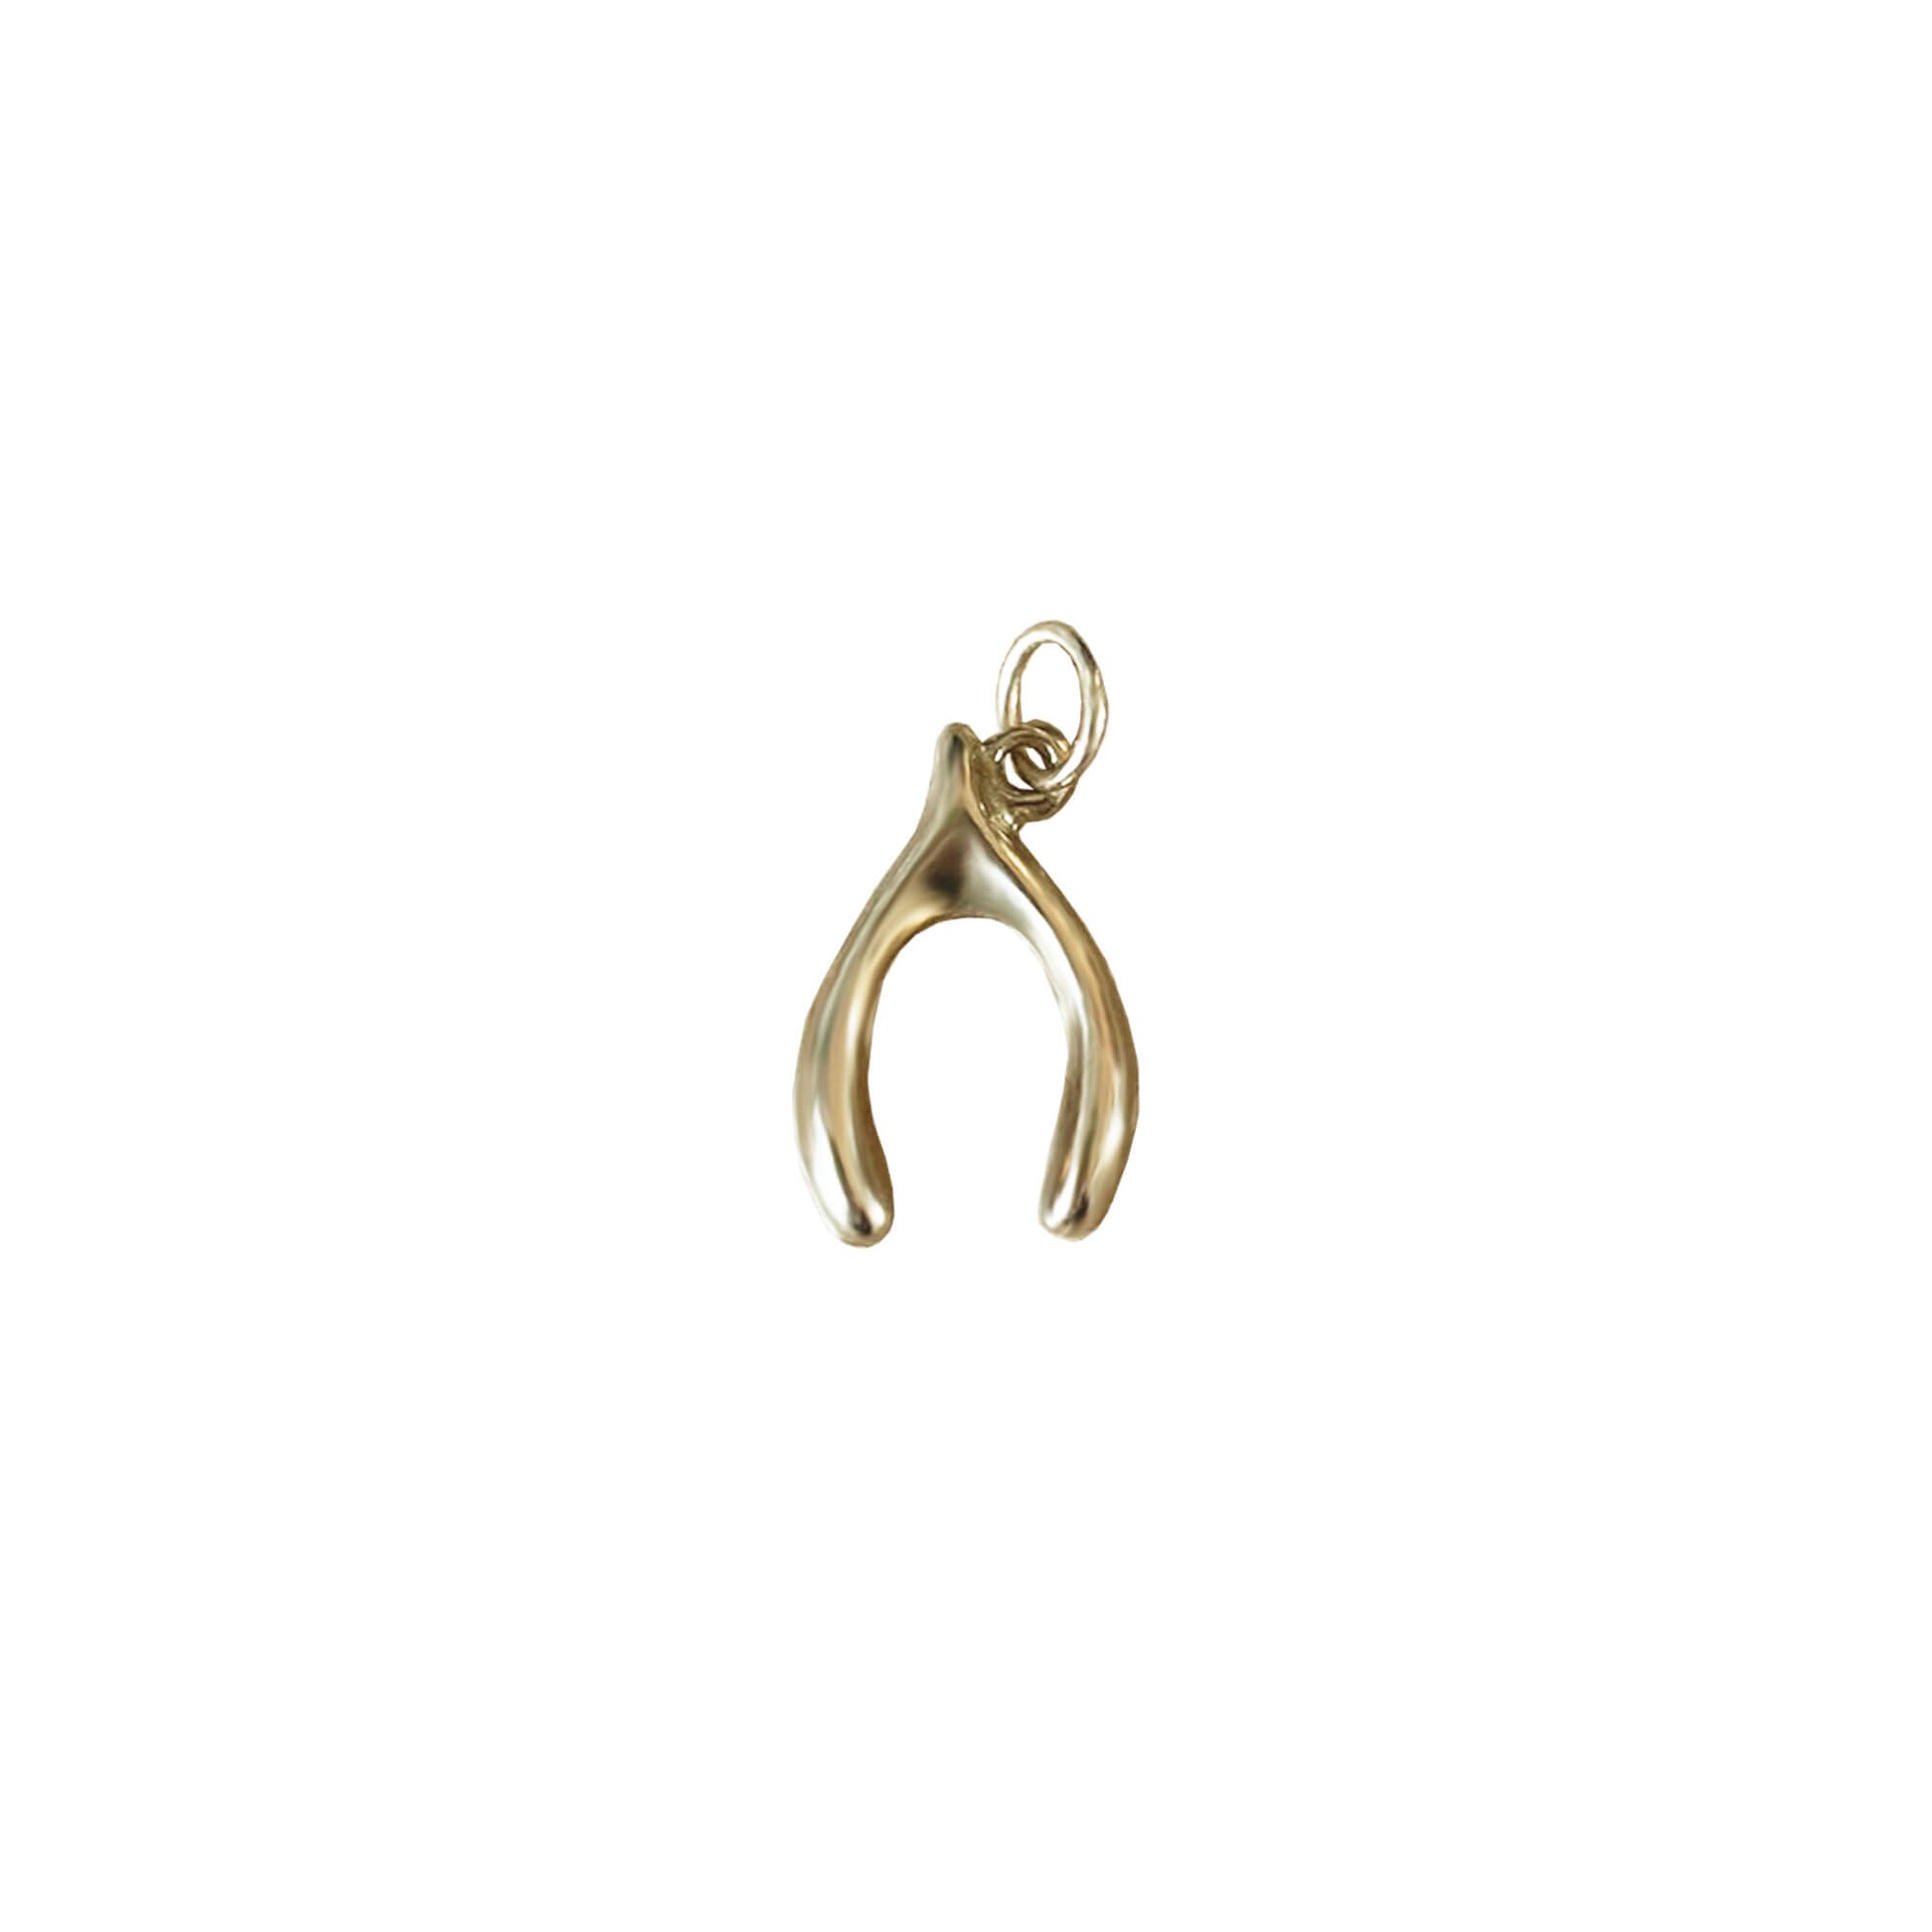 vintage 9k gold wishbone charm with jump ring.